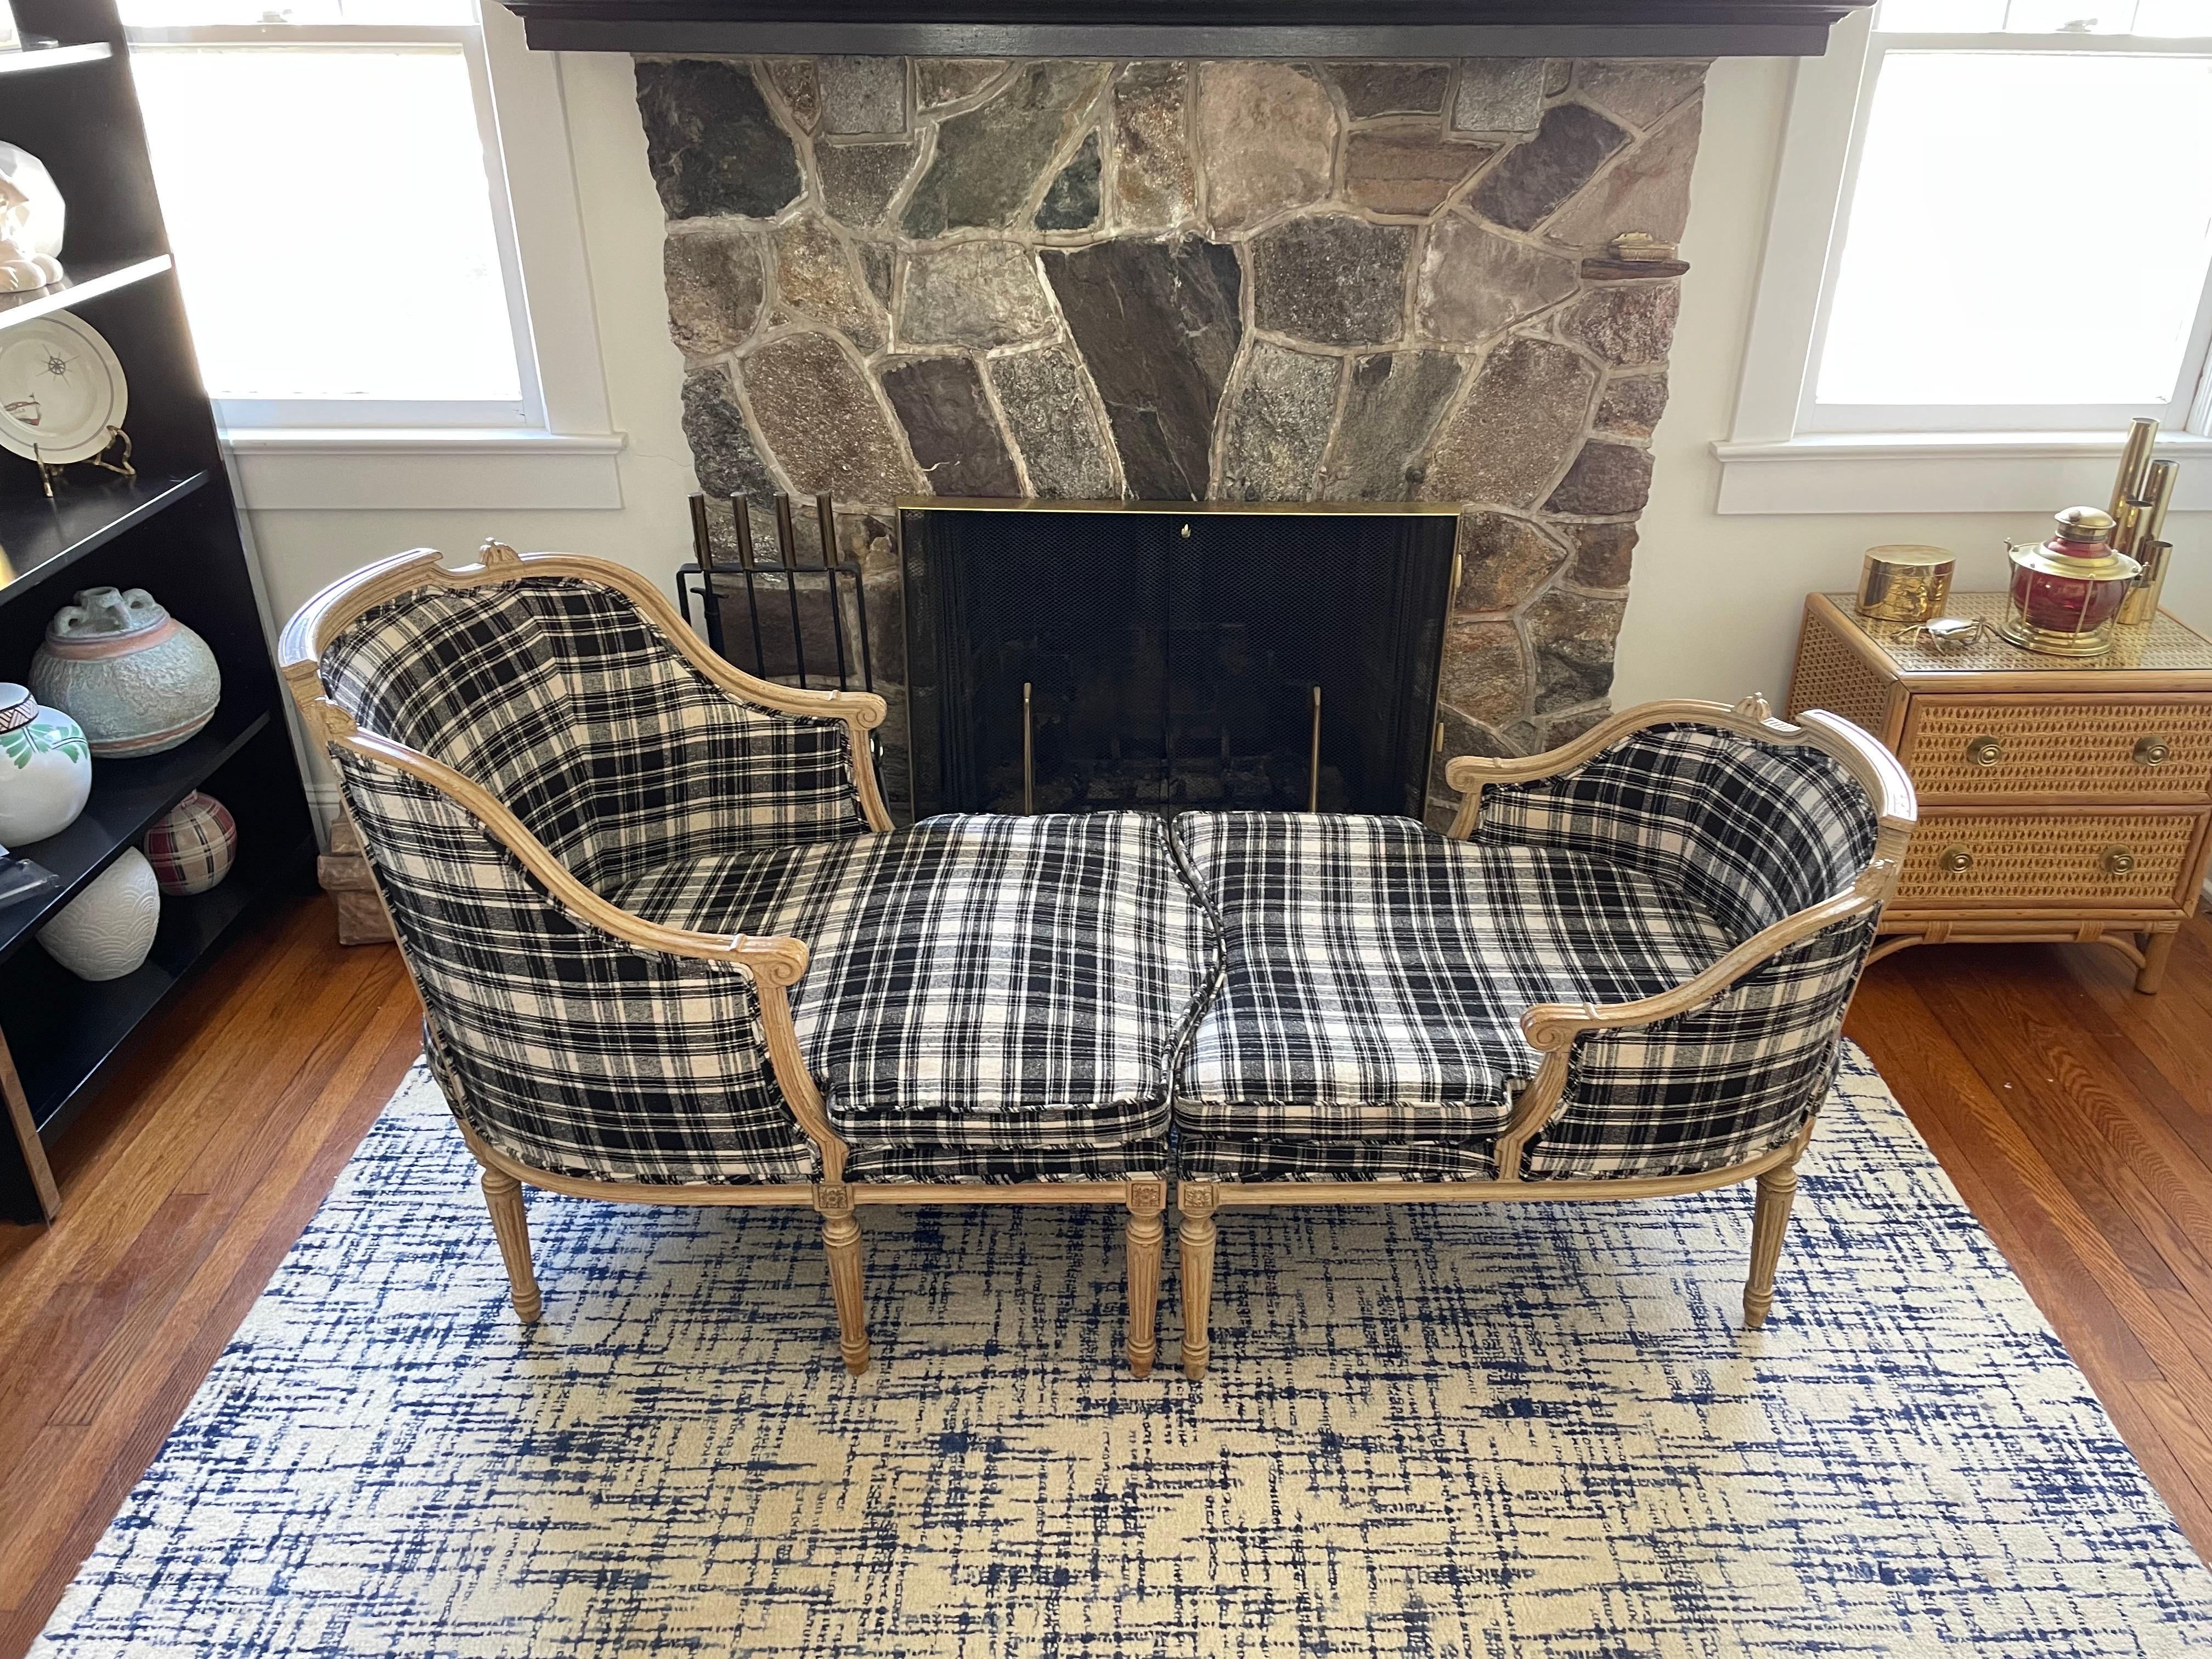 Fabulous modern take on the Louis XV Duchesse Brisee. Bringing a classic into modern day with wonderful plaid upholstery offsetting the Natural washed frame. Exposed framing adding dimension and style.
Curbside delivery to NYC/Philly $350